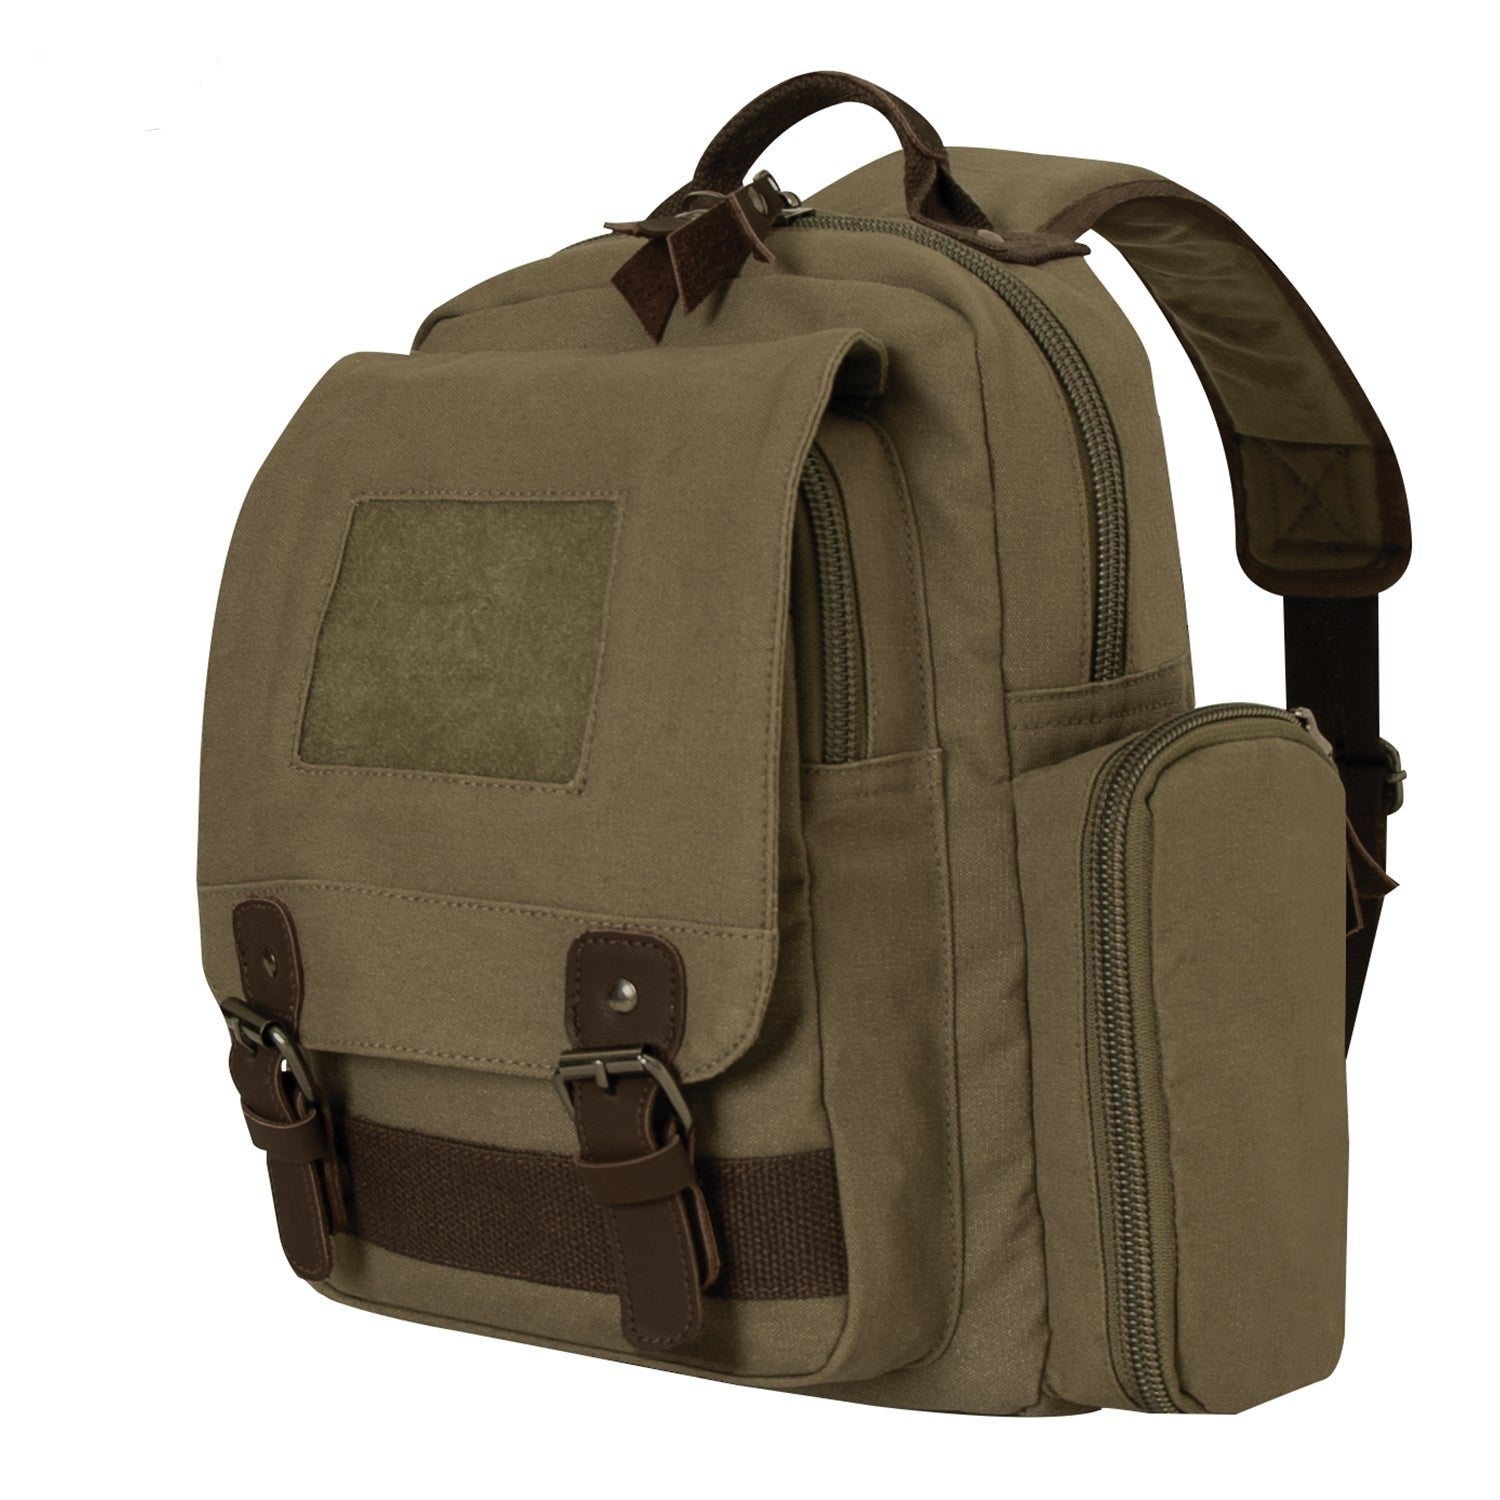  Vintage Canvas Sling Backpack - Tactical Choice Plus